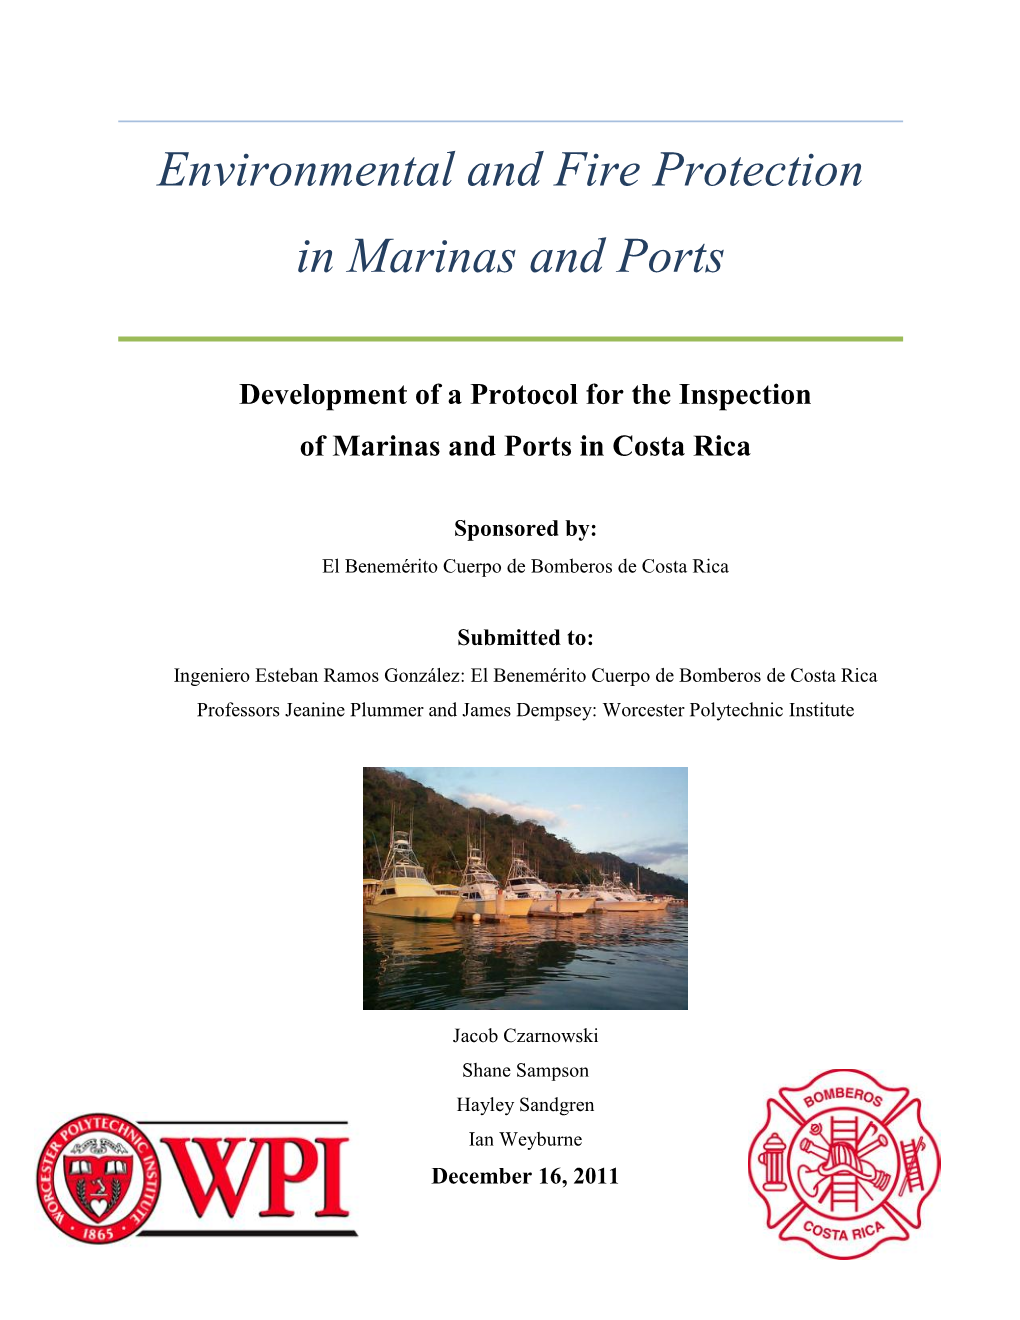 Environmental and Fire Protection in Marinas and Ports